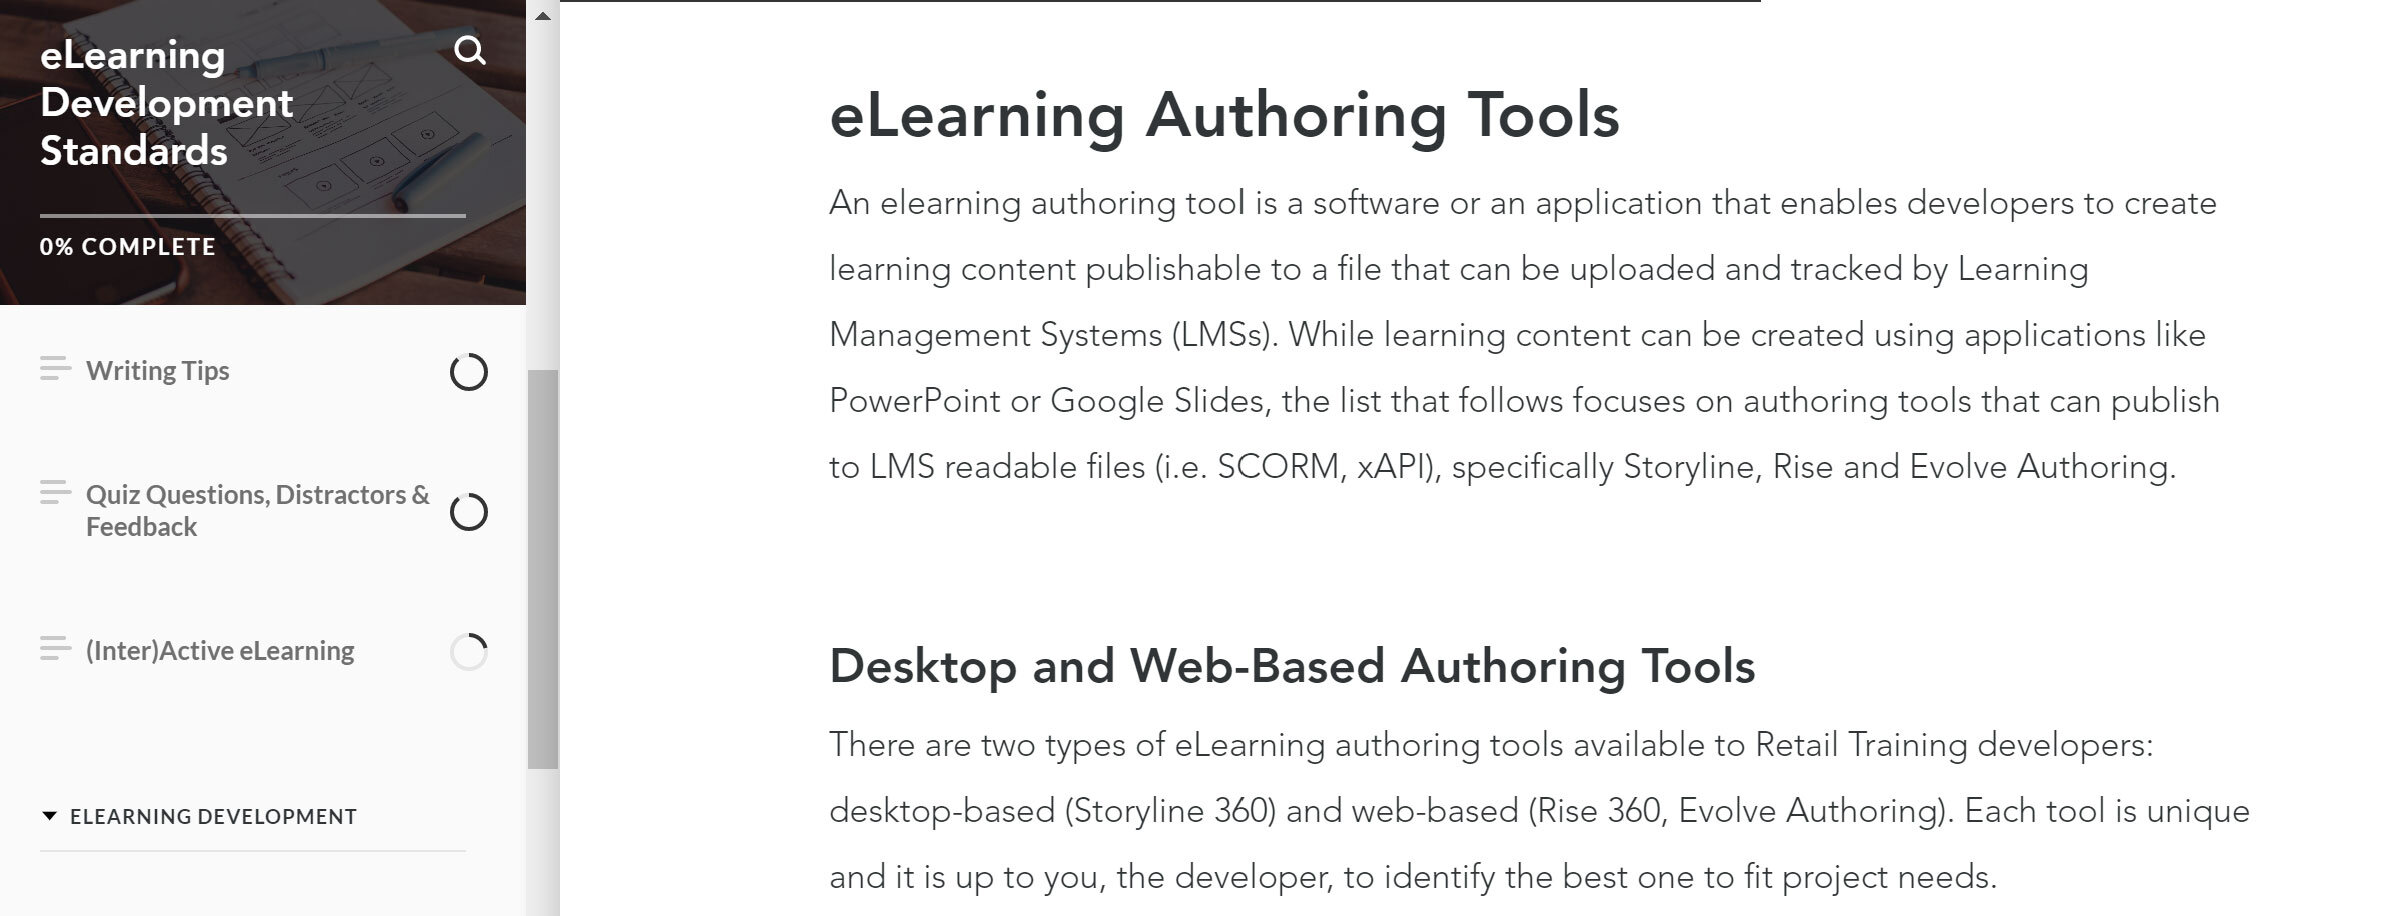  “Authoring Tools: Desktop vs. Web” page introduces elearning authoring tools available to staff. 